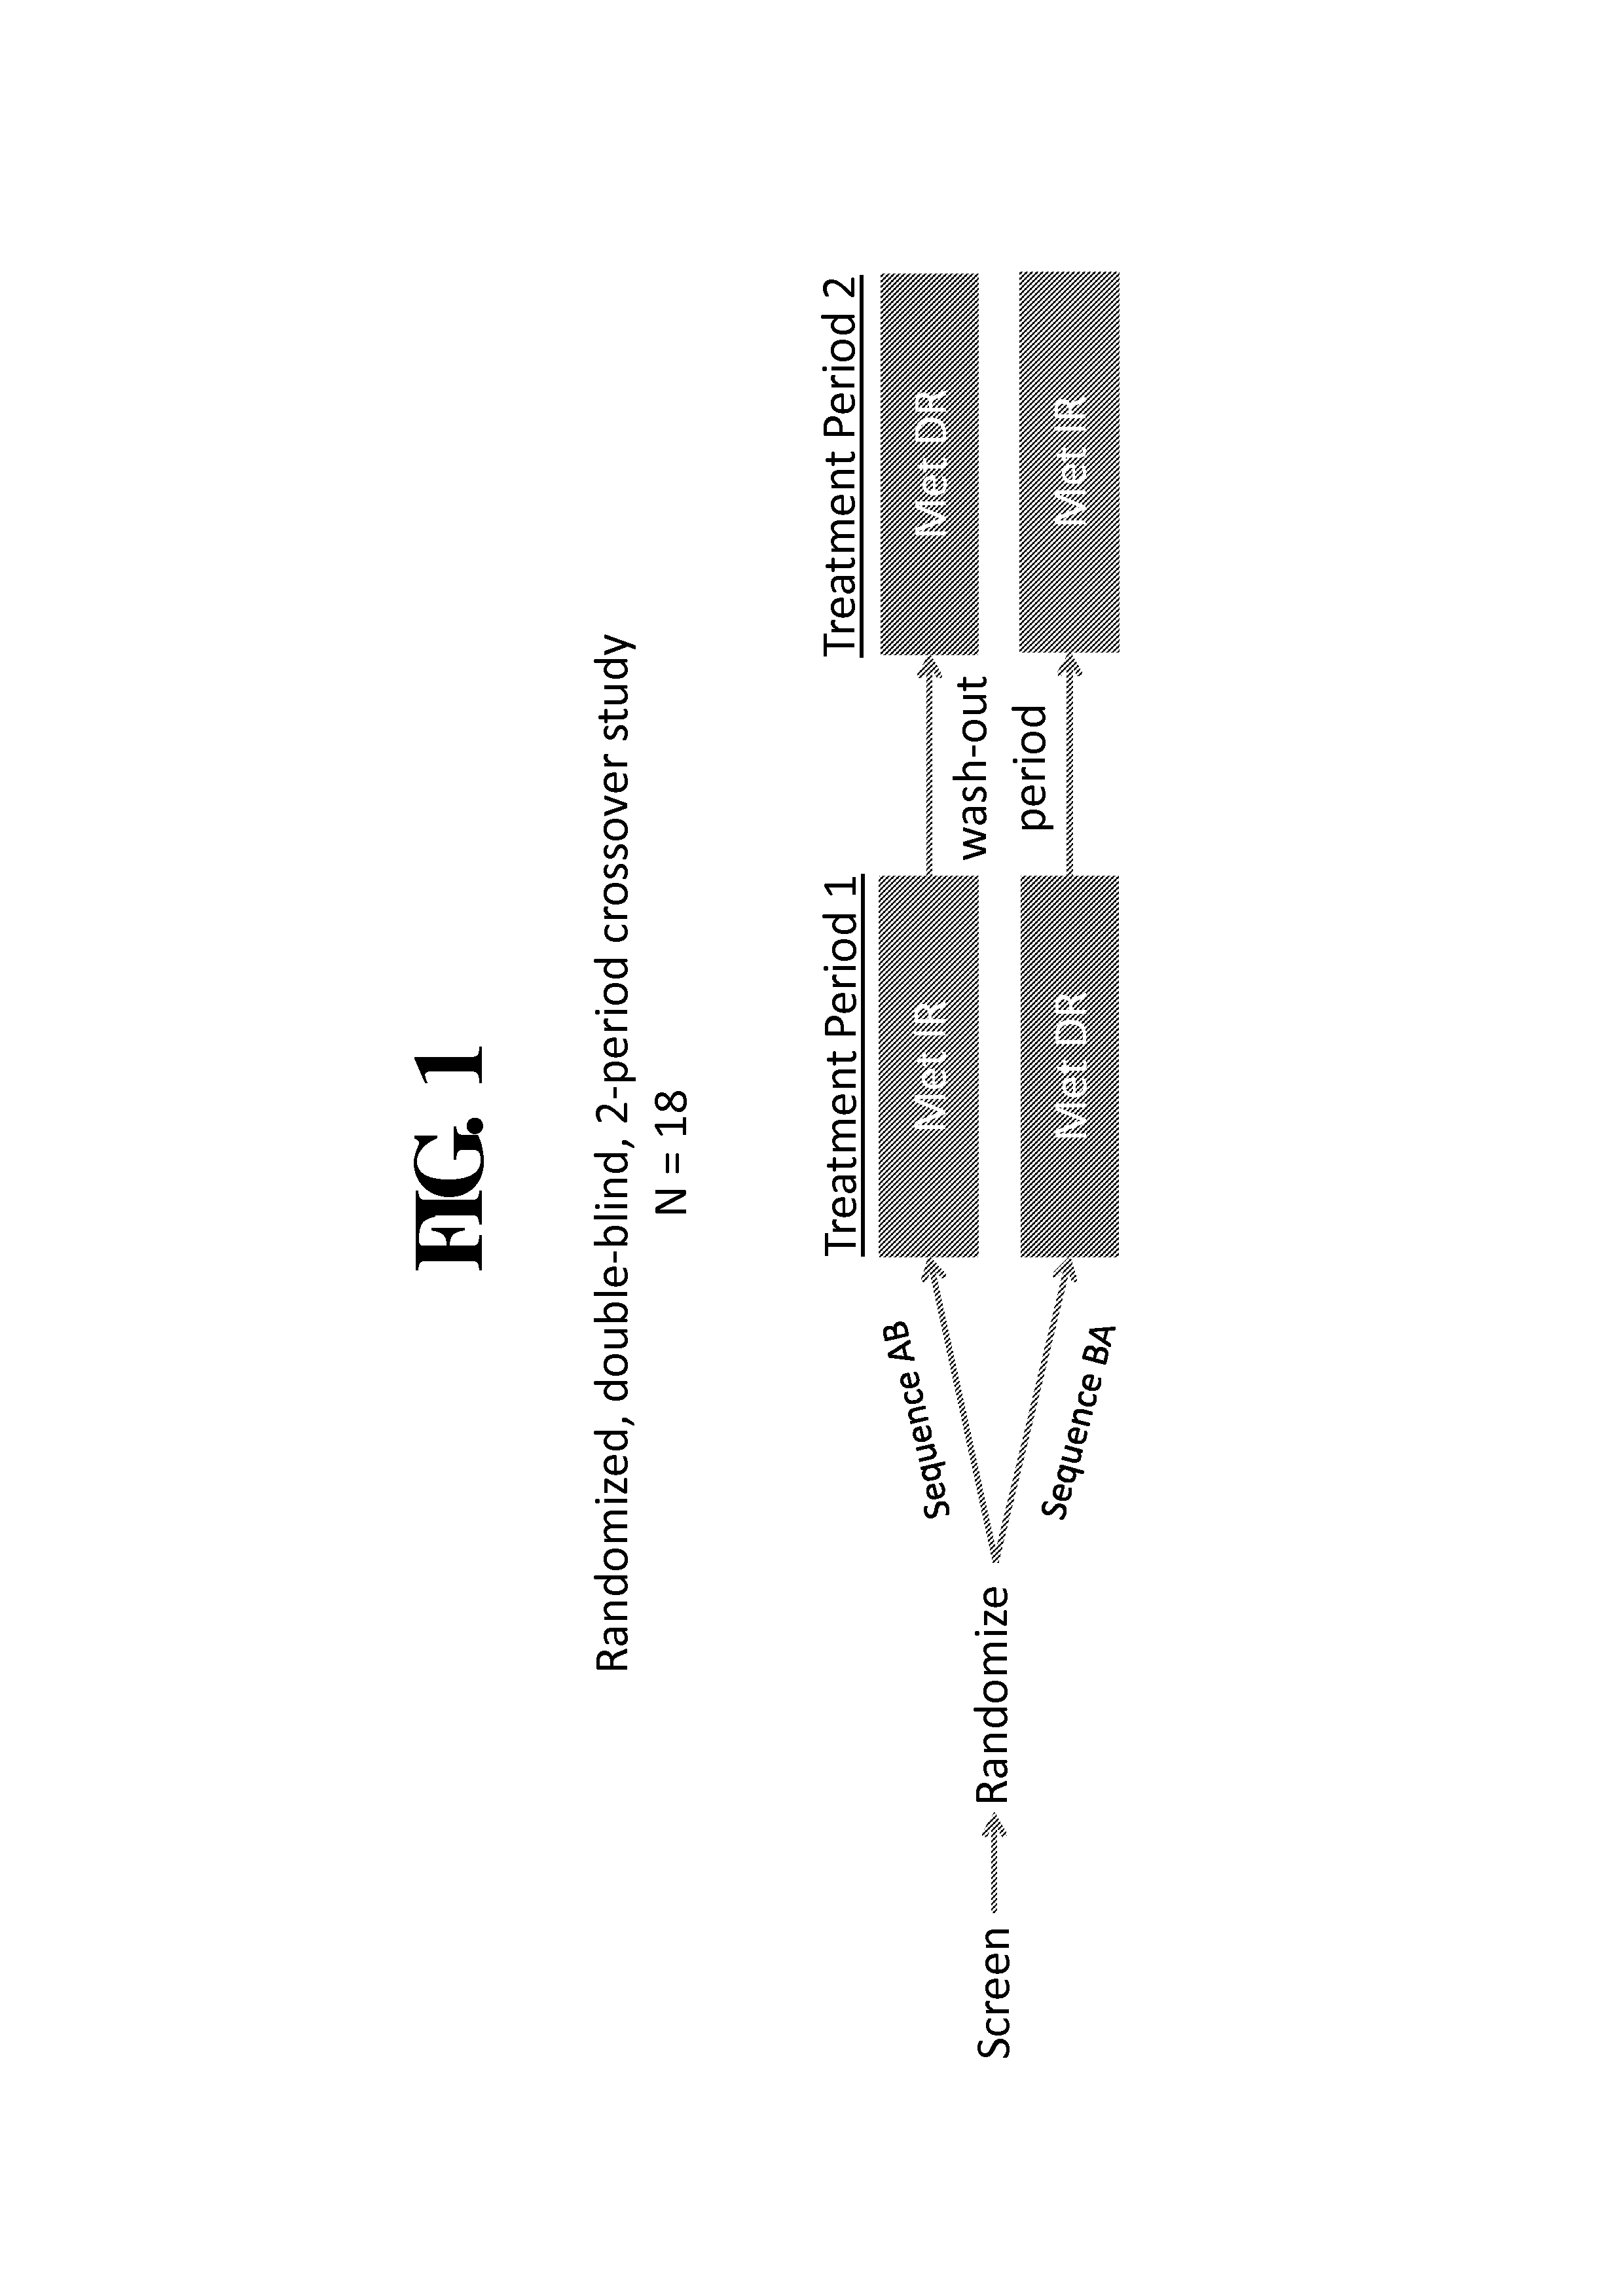 Compositions and Methods of Treating Metabolic Disorders